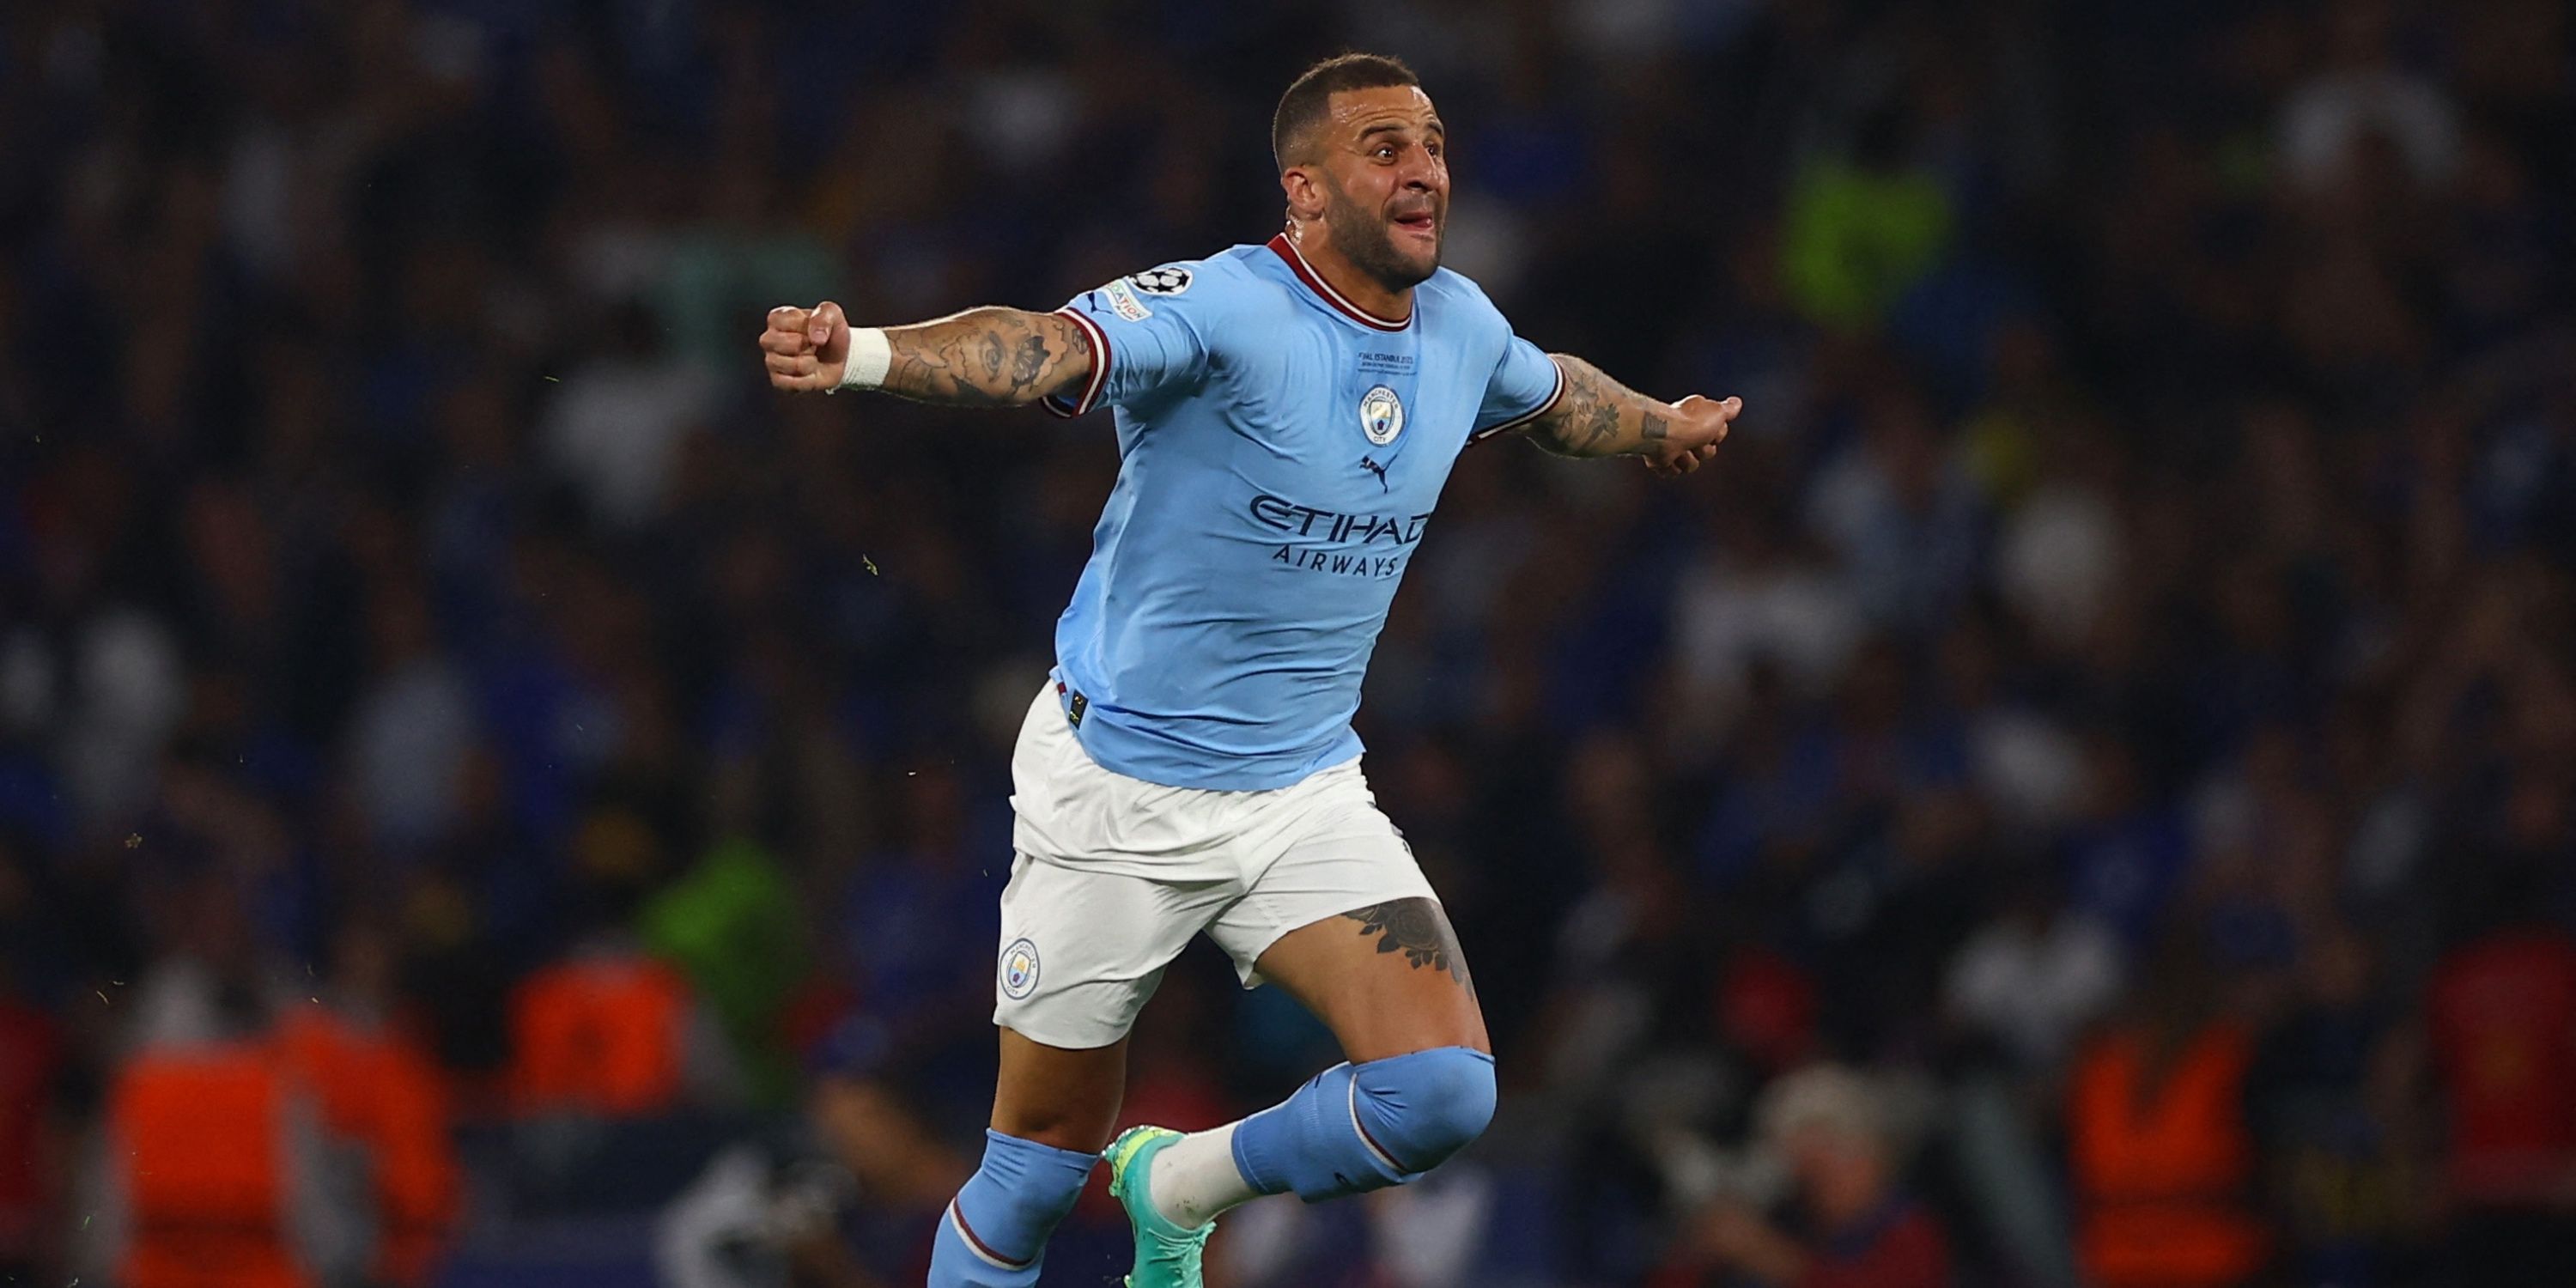 Kyle Walker Linked With Shock Move to Premier League Club